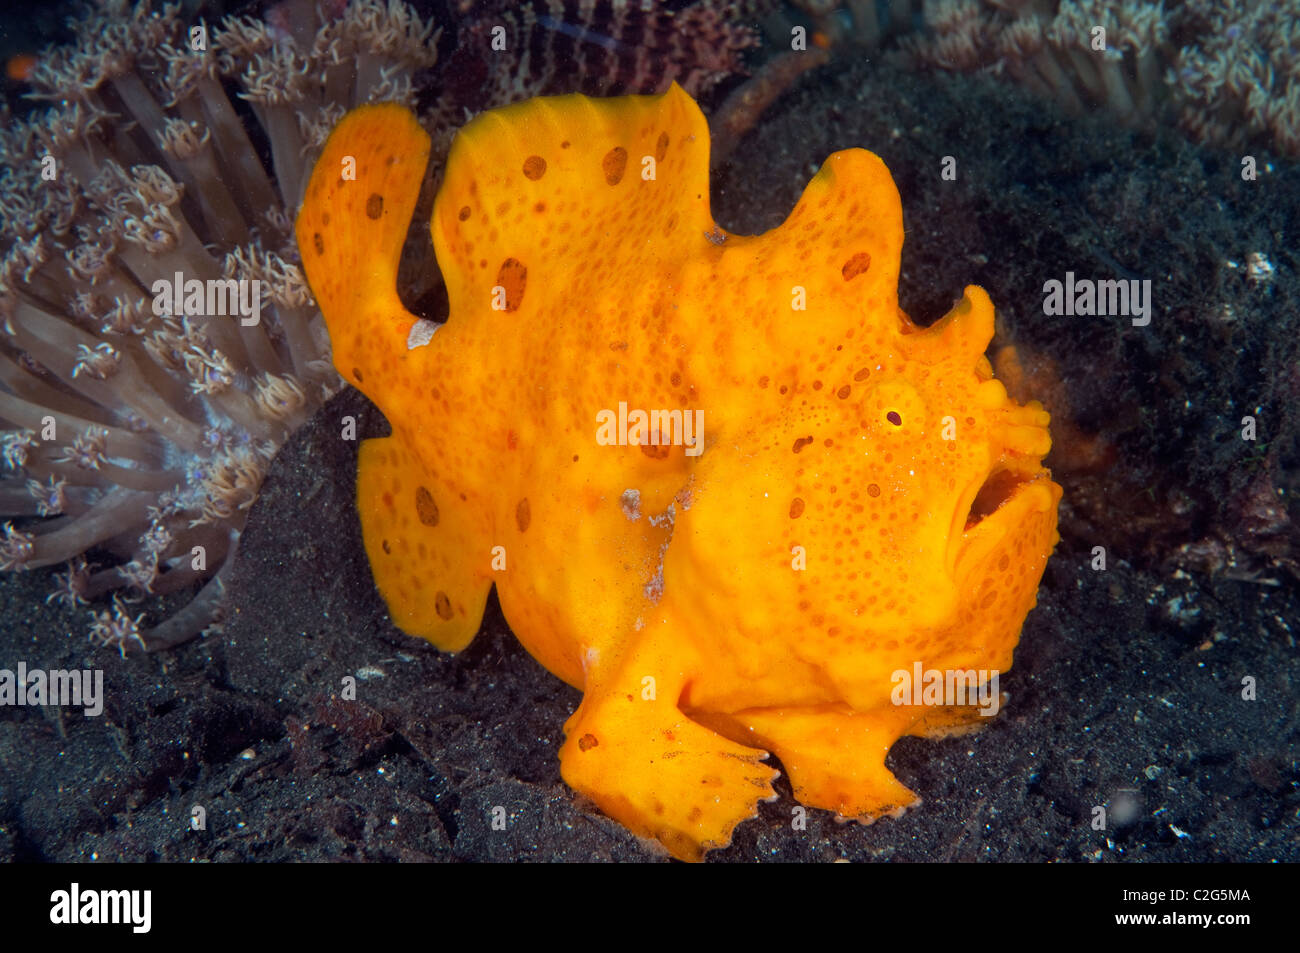 Giant frogfish, Antennarius commersoni, Sulawesi Indonesia. Stock Photo